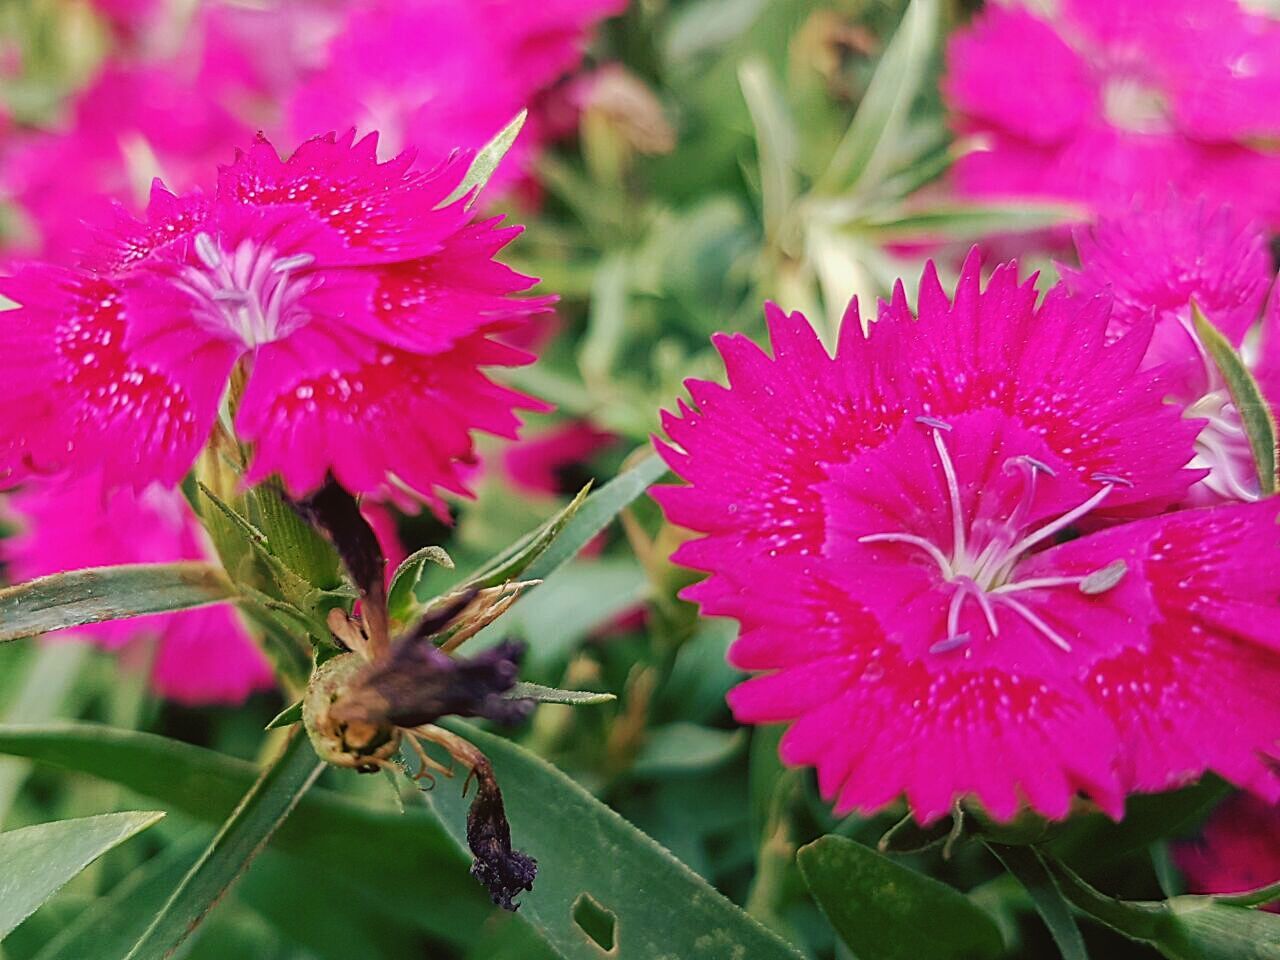 CLOSE-UP OF INSECT ON PINK FLOWER BLOOMING OUTDOORS